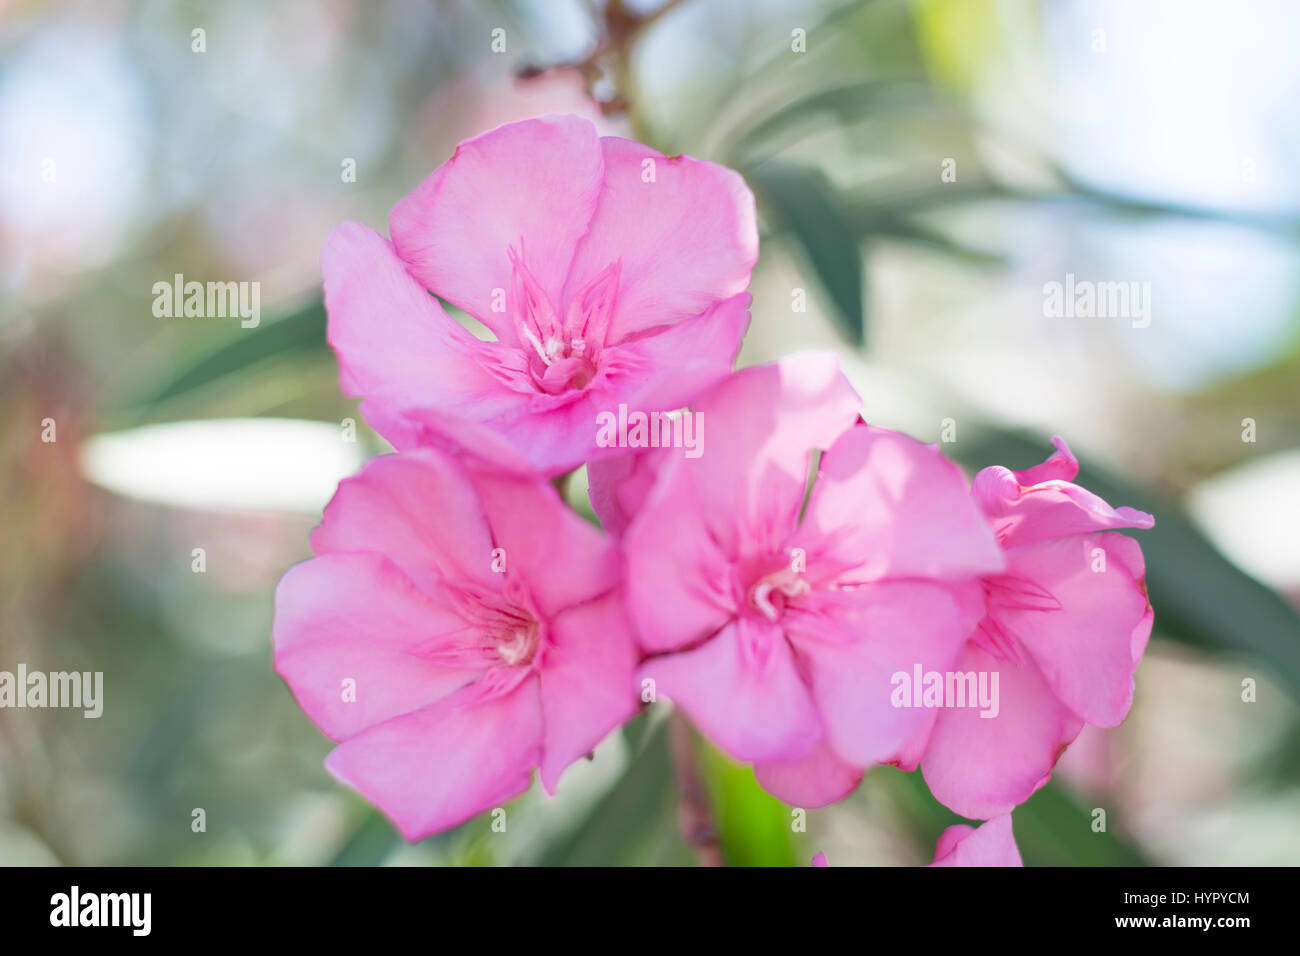 Close up of pink flowers with soft focus. Nerium oleander Stock Photo